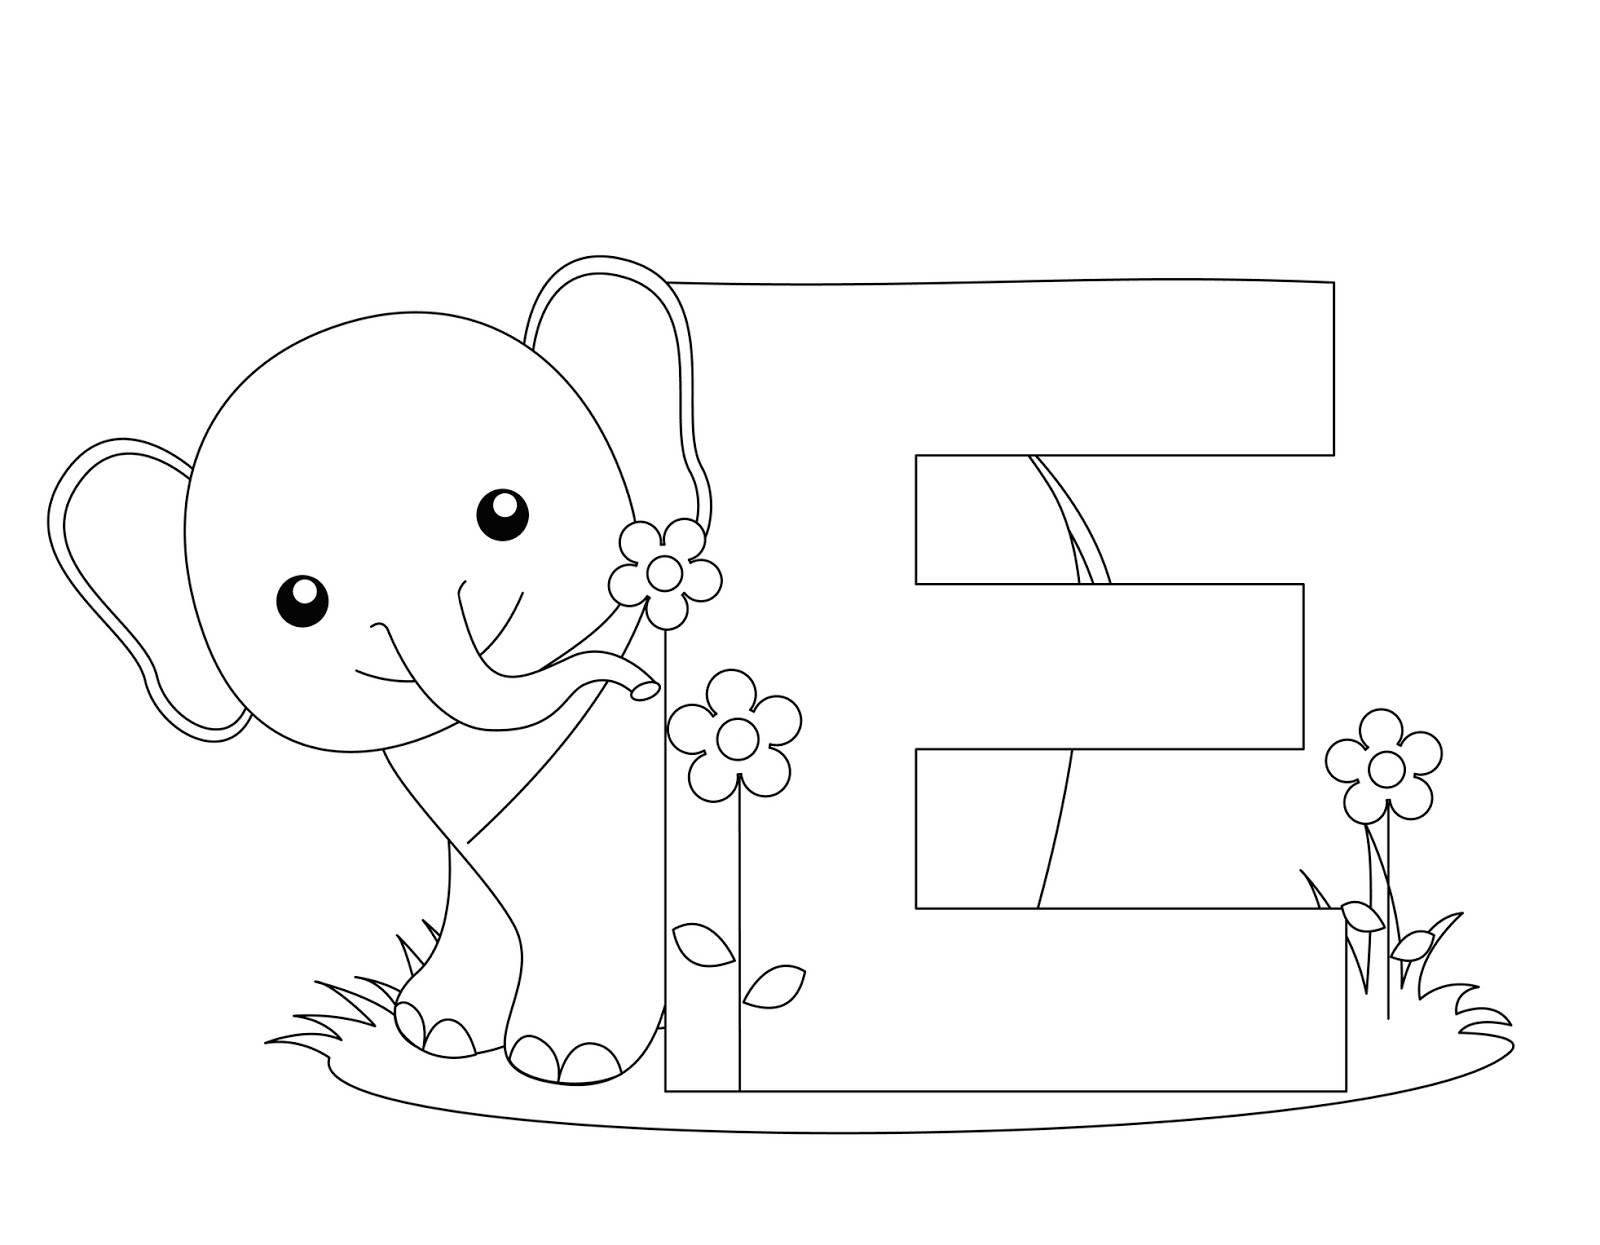 Drawing Alphabet 20 Educational – Printable coloring pages